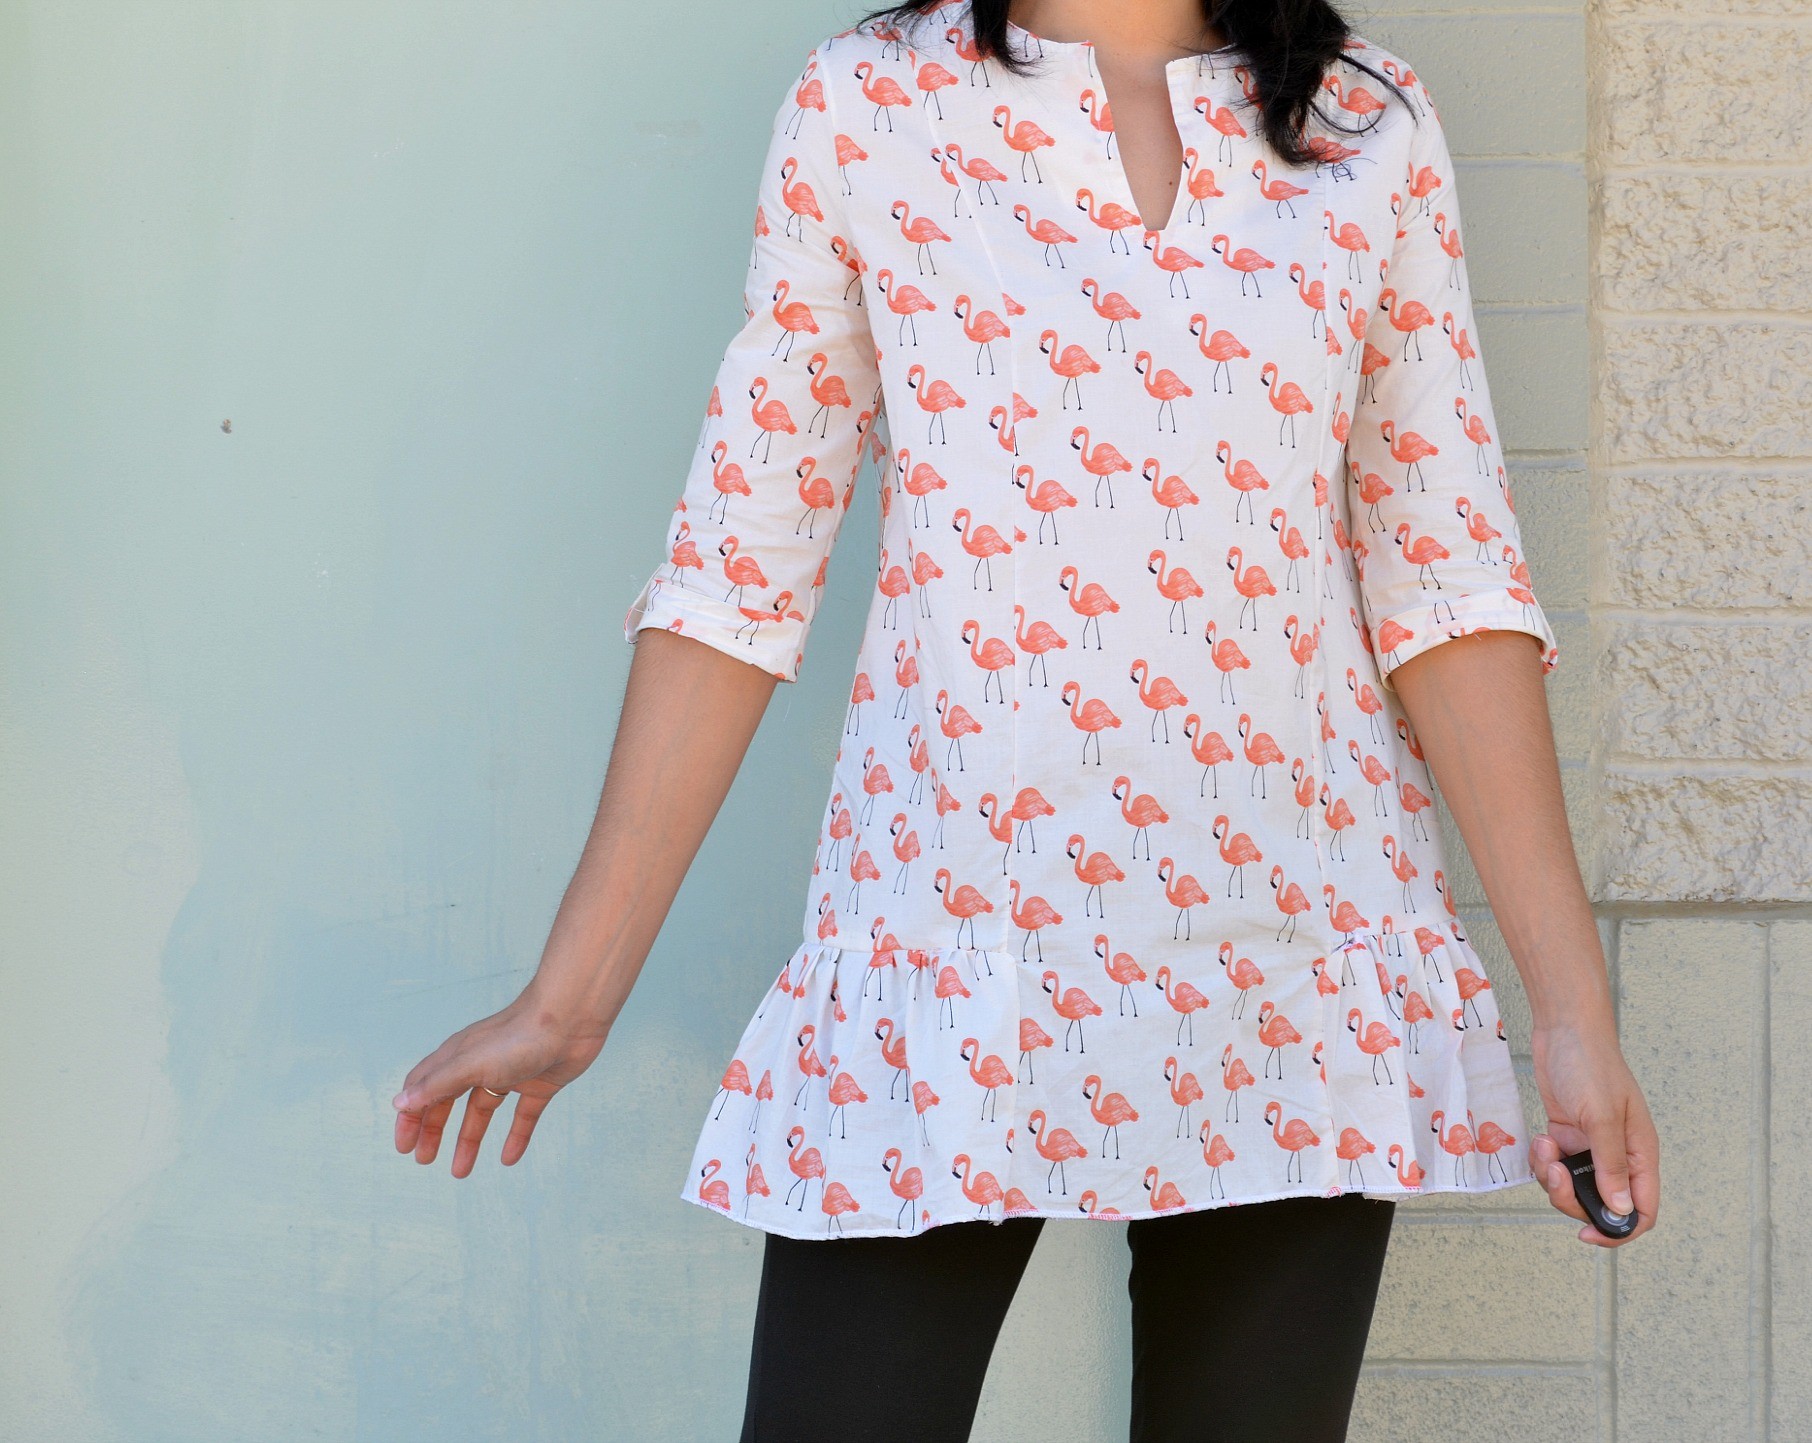 free-pattern-alert-the-luise-tunic-pdf-on-the-cutting-floor-printable-pdf-sewing-patterns